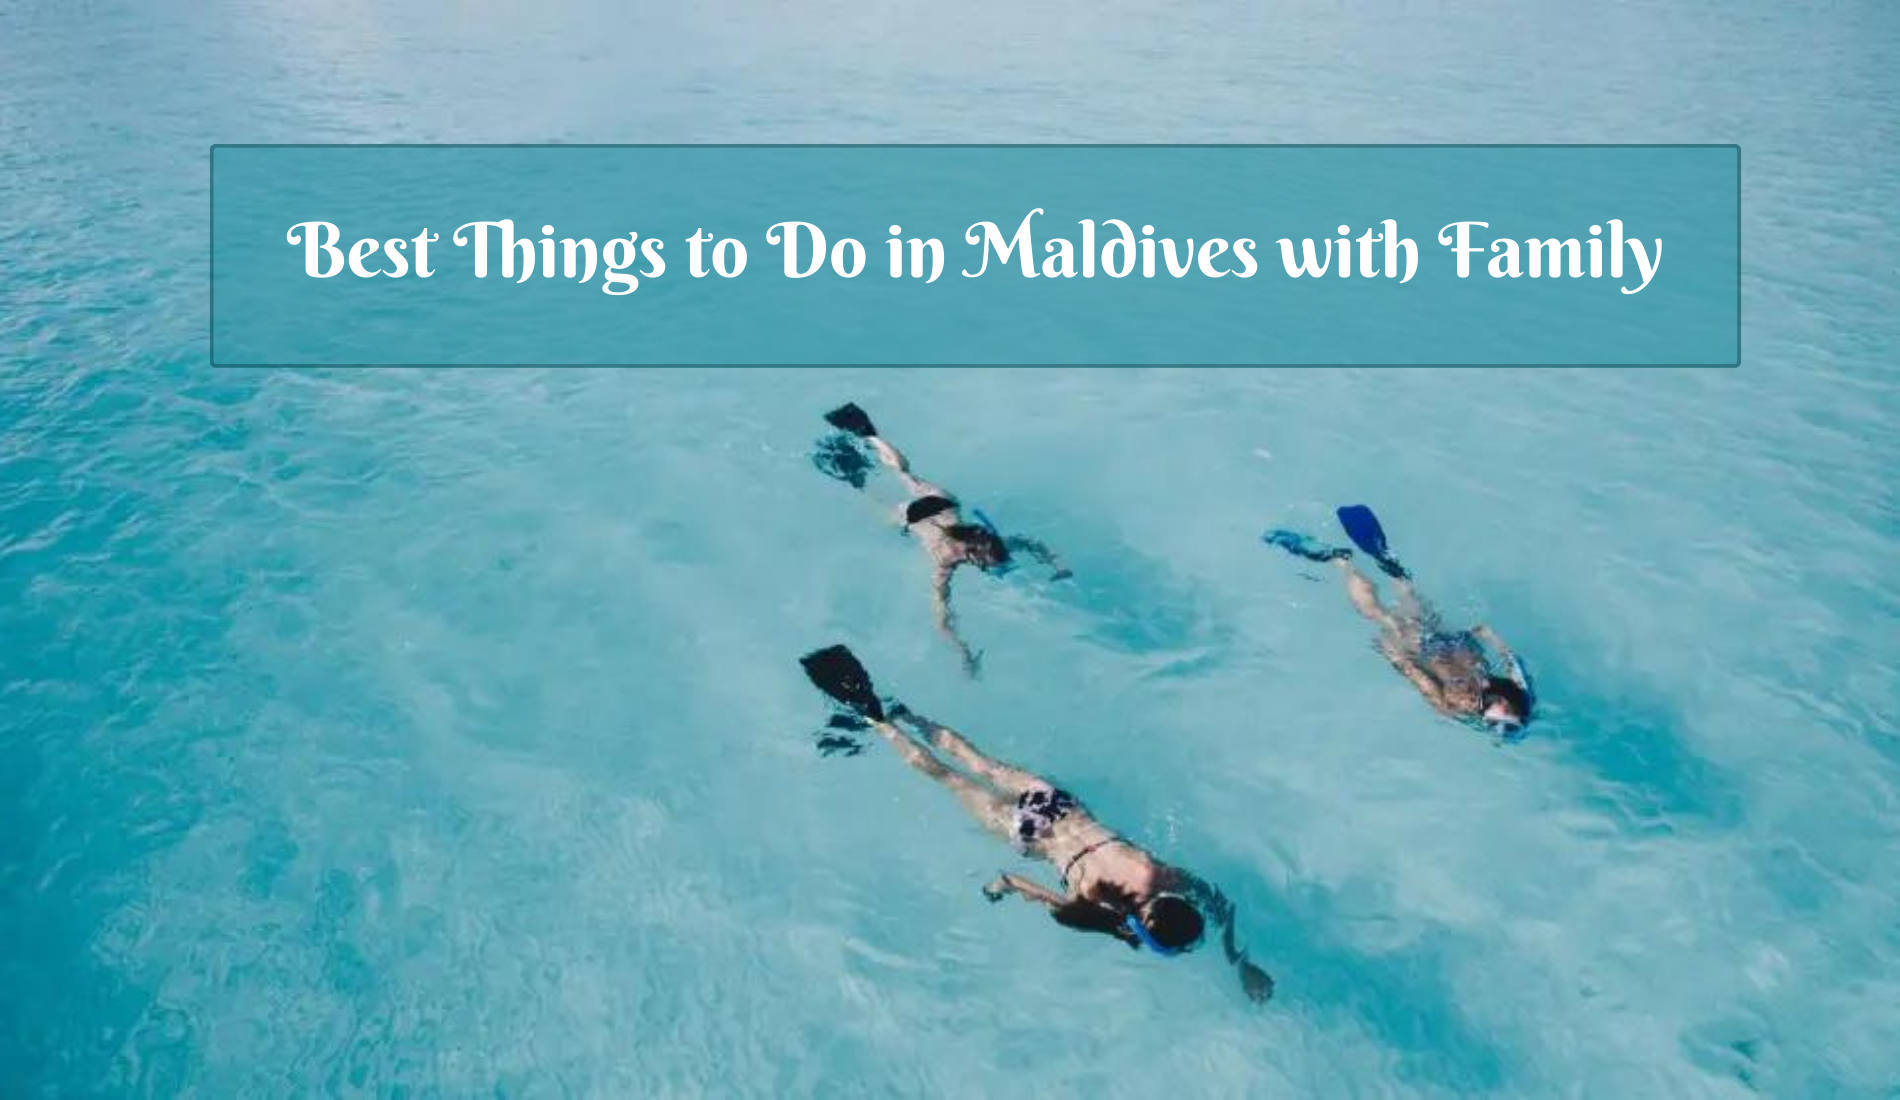 Best Things to Do in Maldives with Family